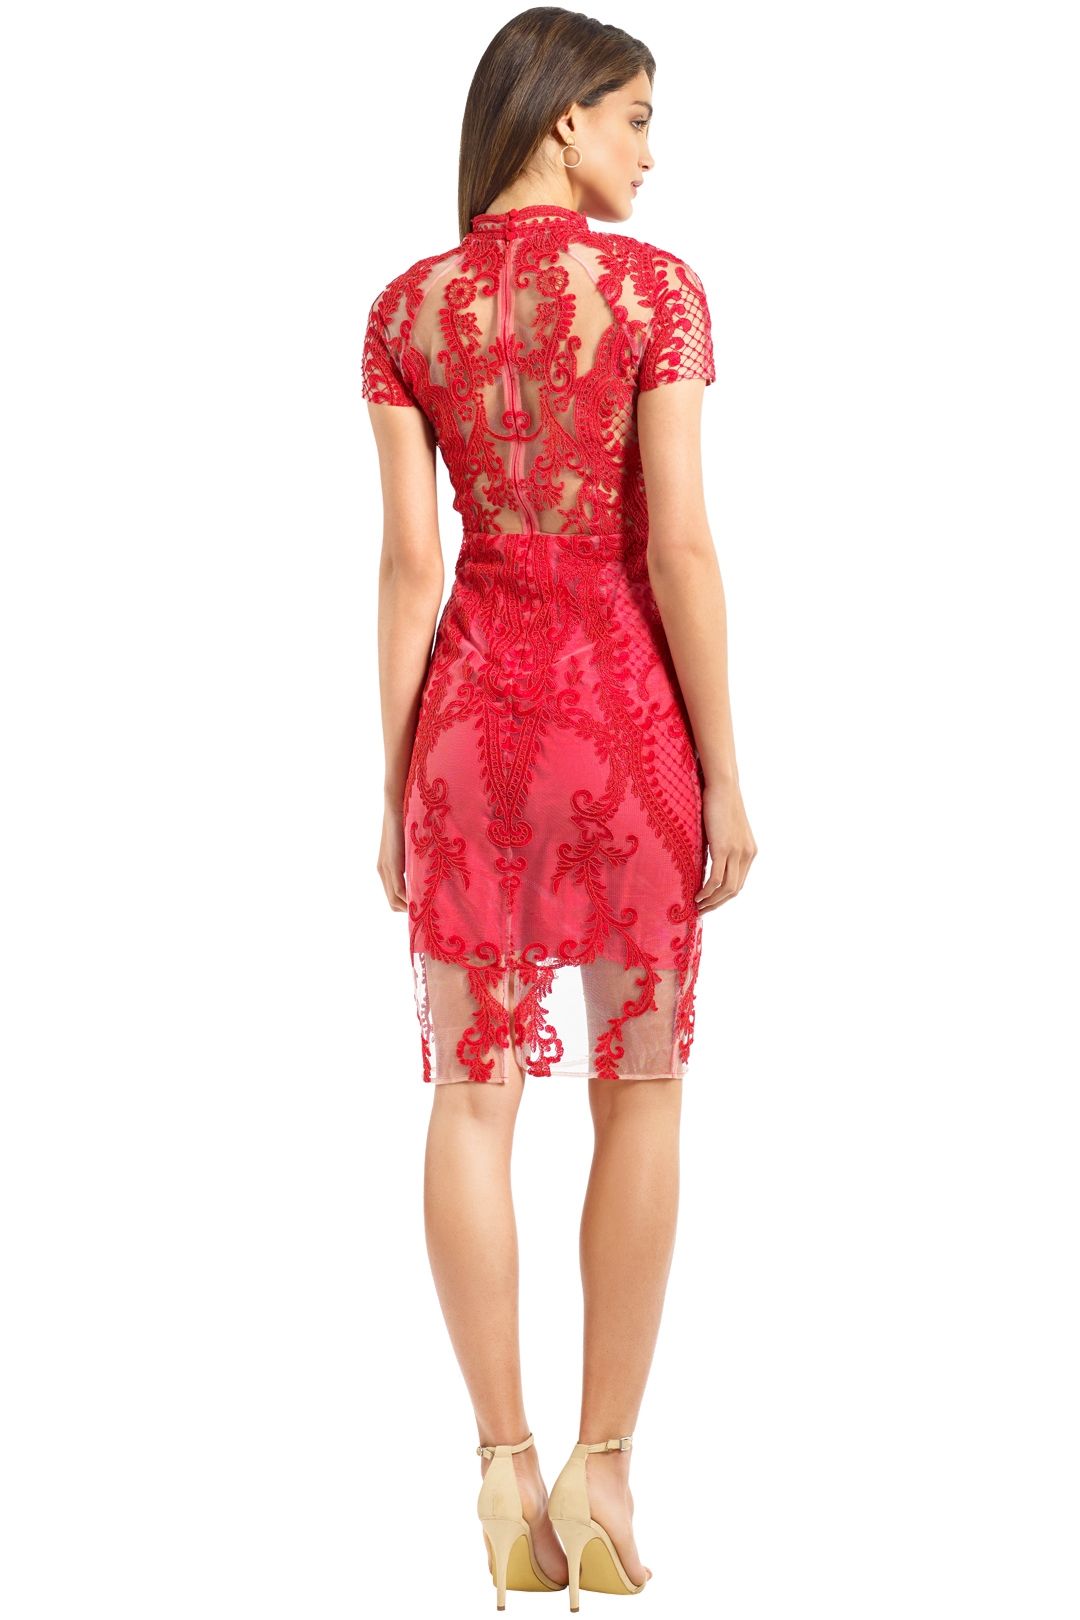 Thurley - Indianna Dress - Red - Back